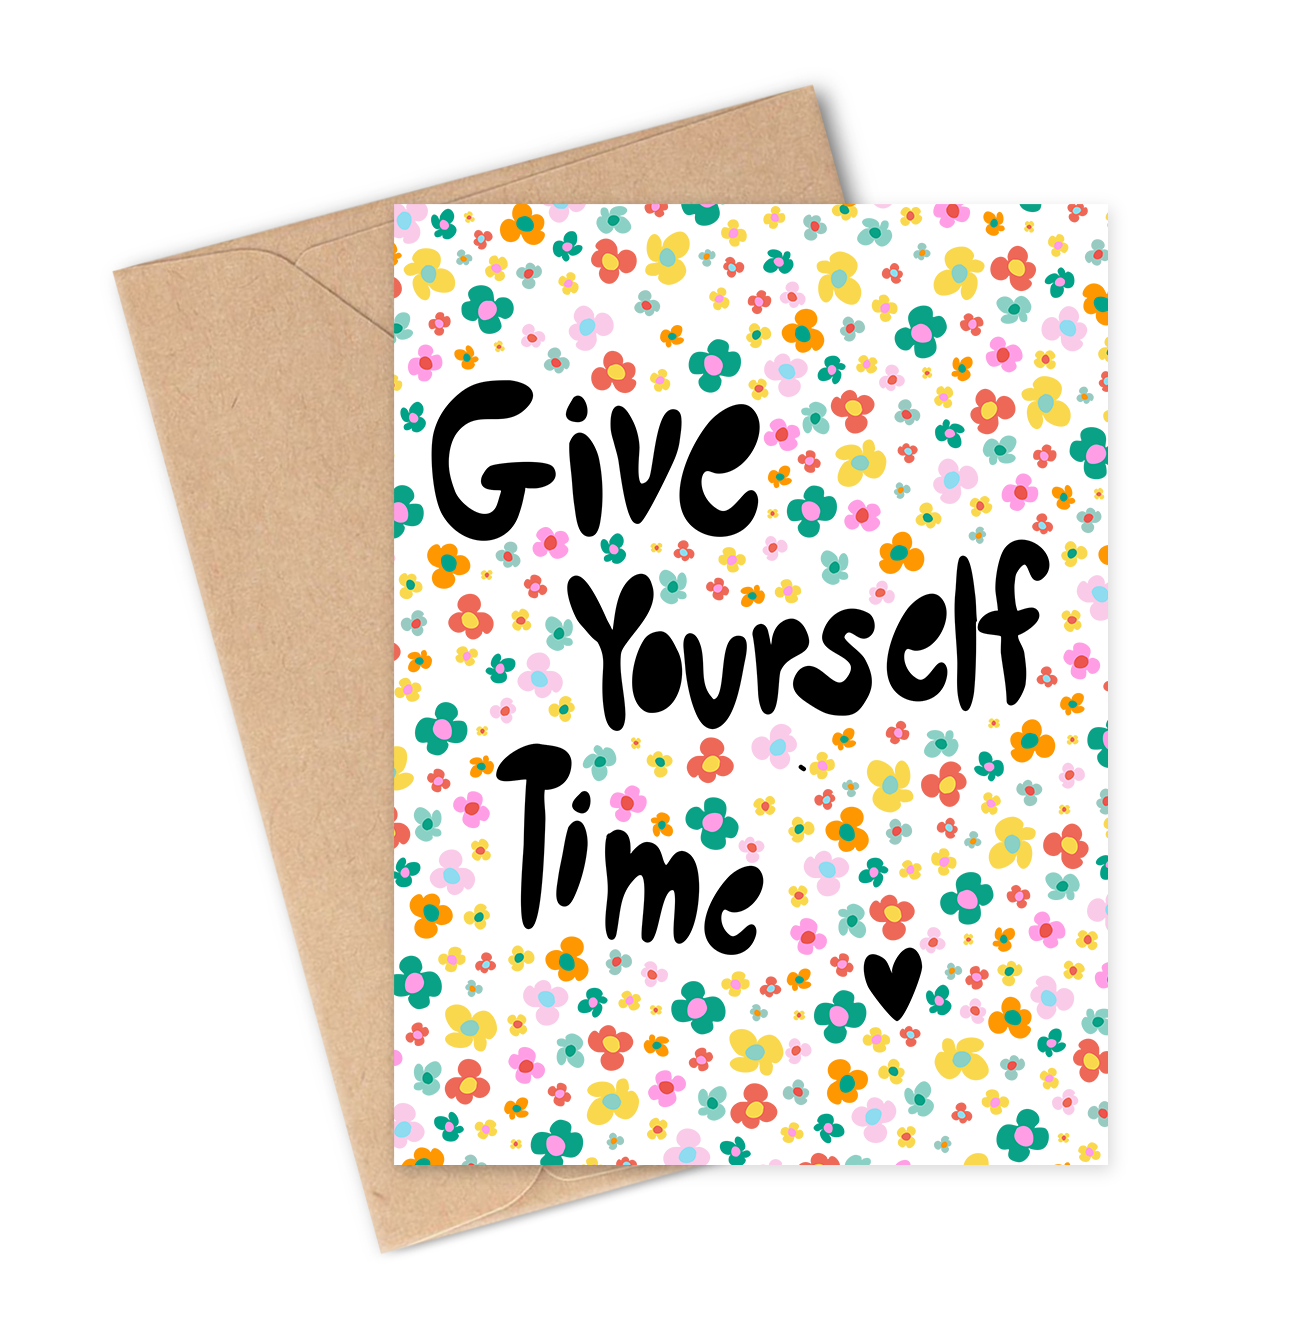 Give yourself time greeting card